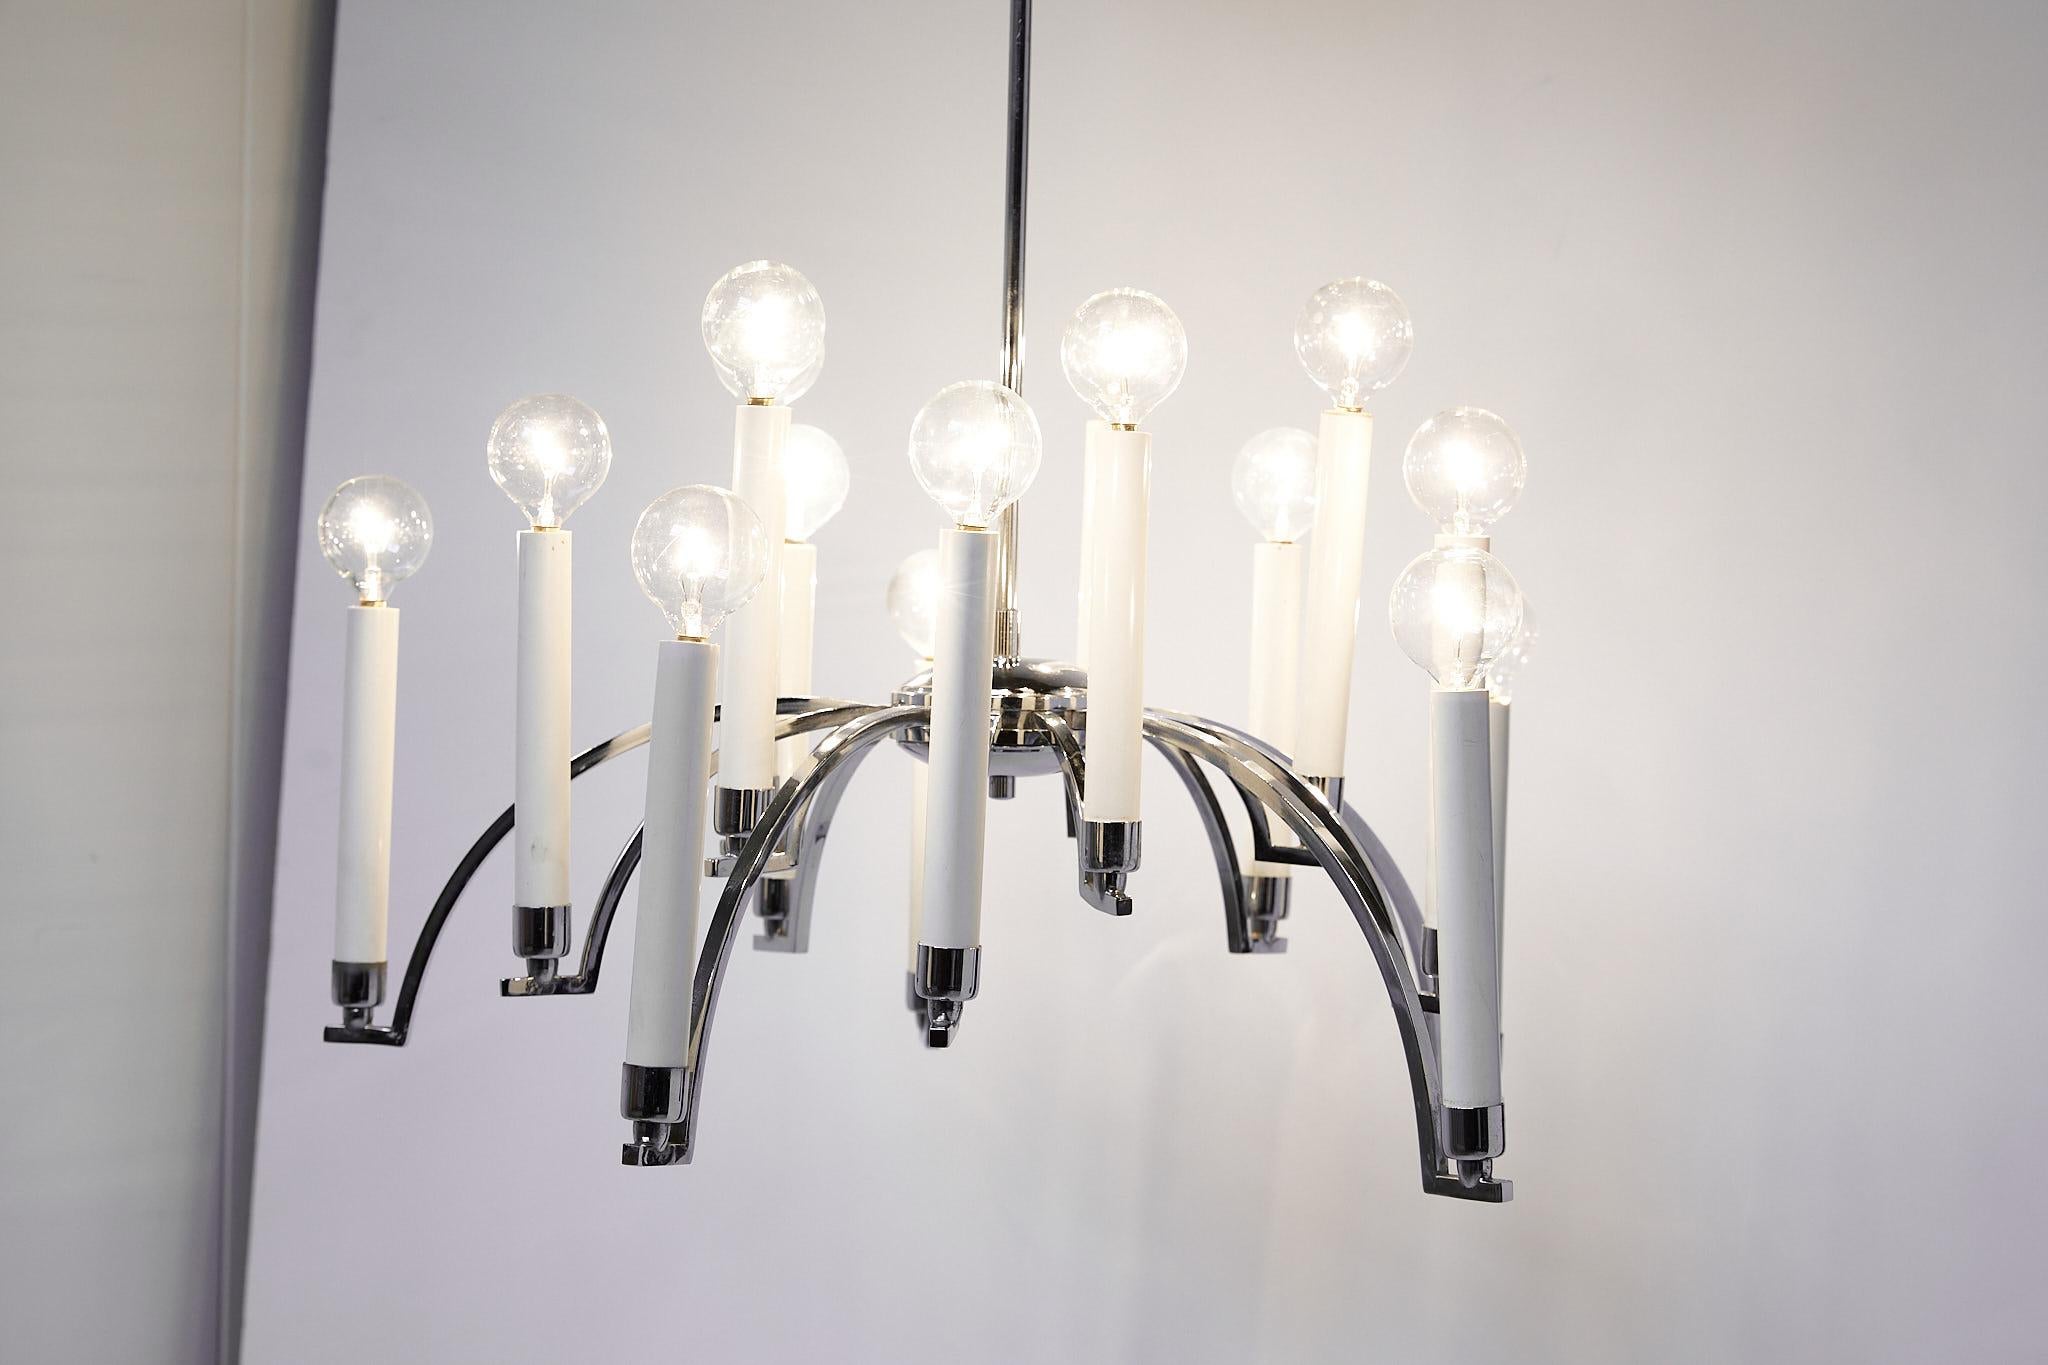 Mid-20th century chandelier made of chrome with 14 downswept arms supporting modern candlesticks holding chandelier bulbs. The chandelier was manufactured in the 1970s by Lightolier.